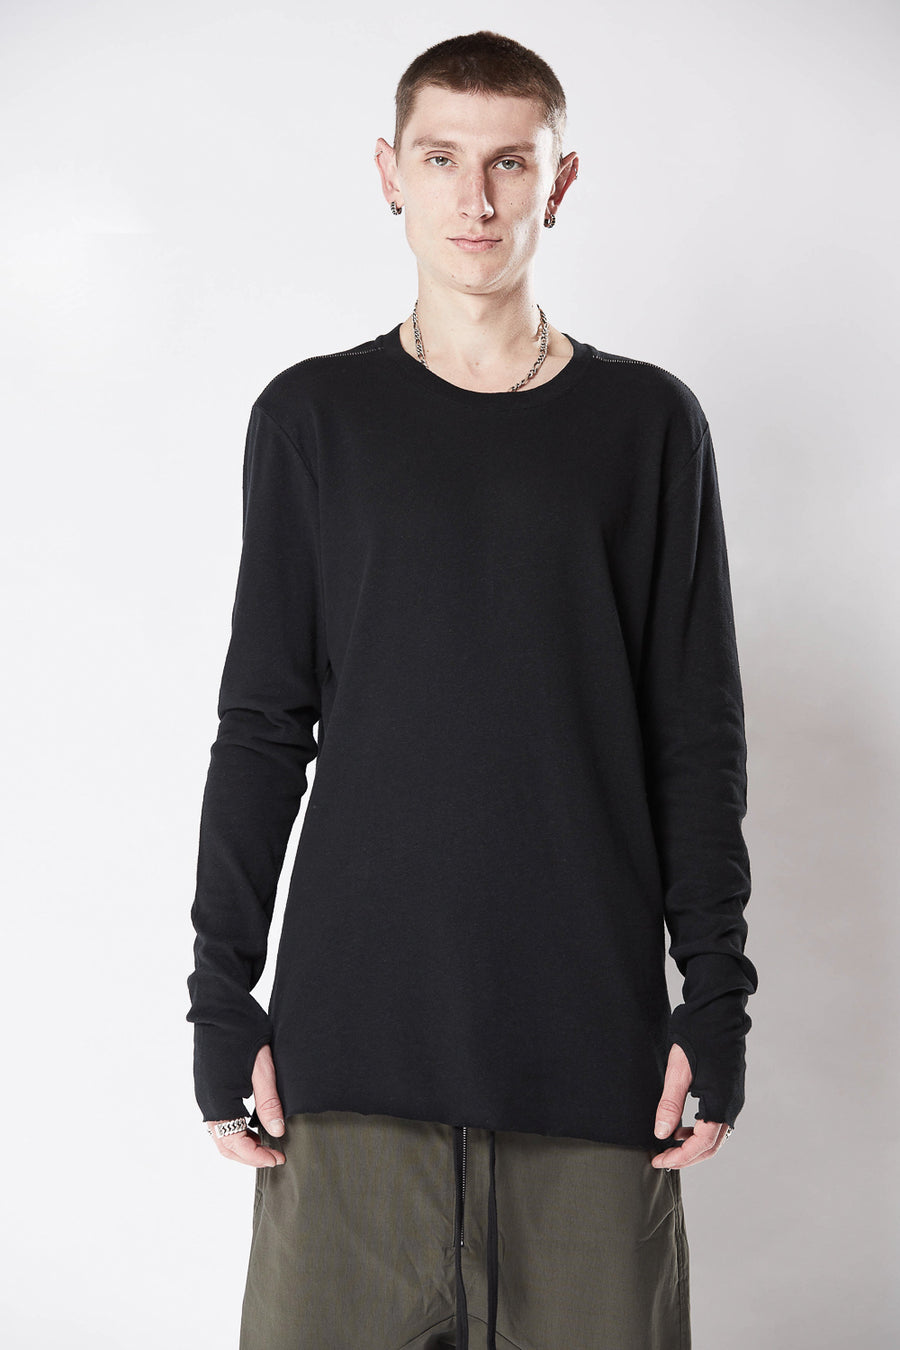 Buy the Thom Krom M TS 778 L/S T-Shirt in Black at Intro. Spend £50 for free UK delivery. Official stockists. We ship worldwide.